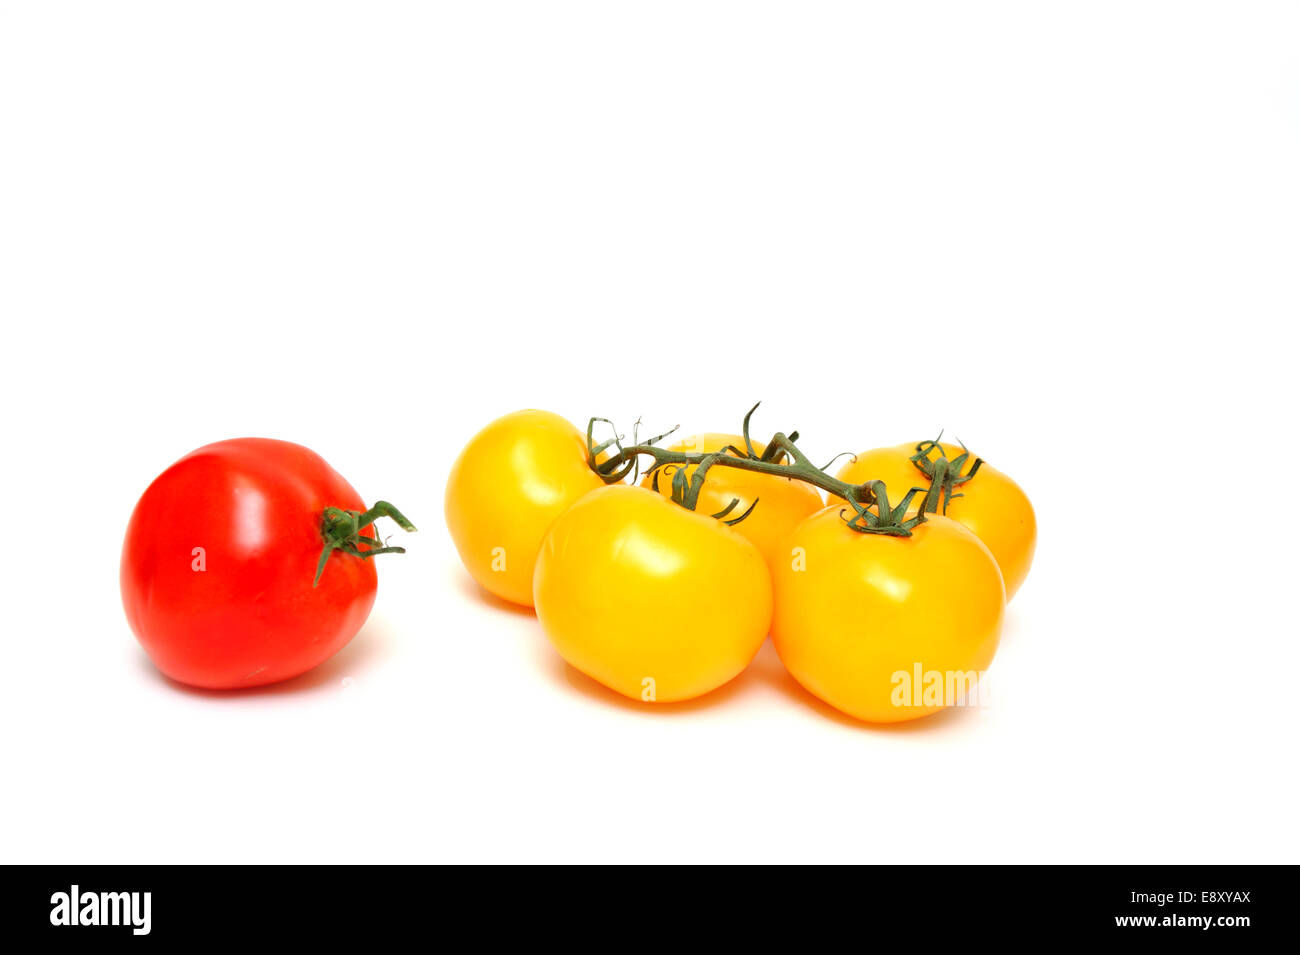 Red And Yellow Tomato Stock Photo